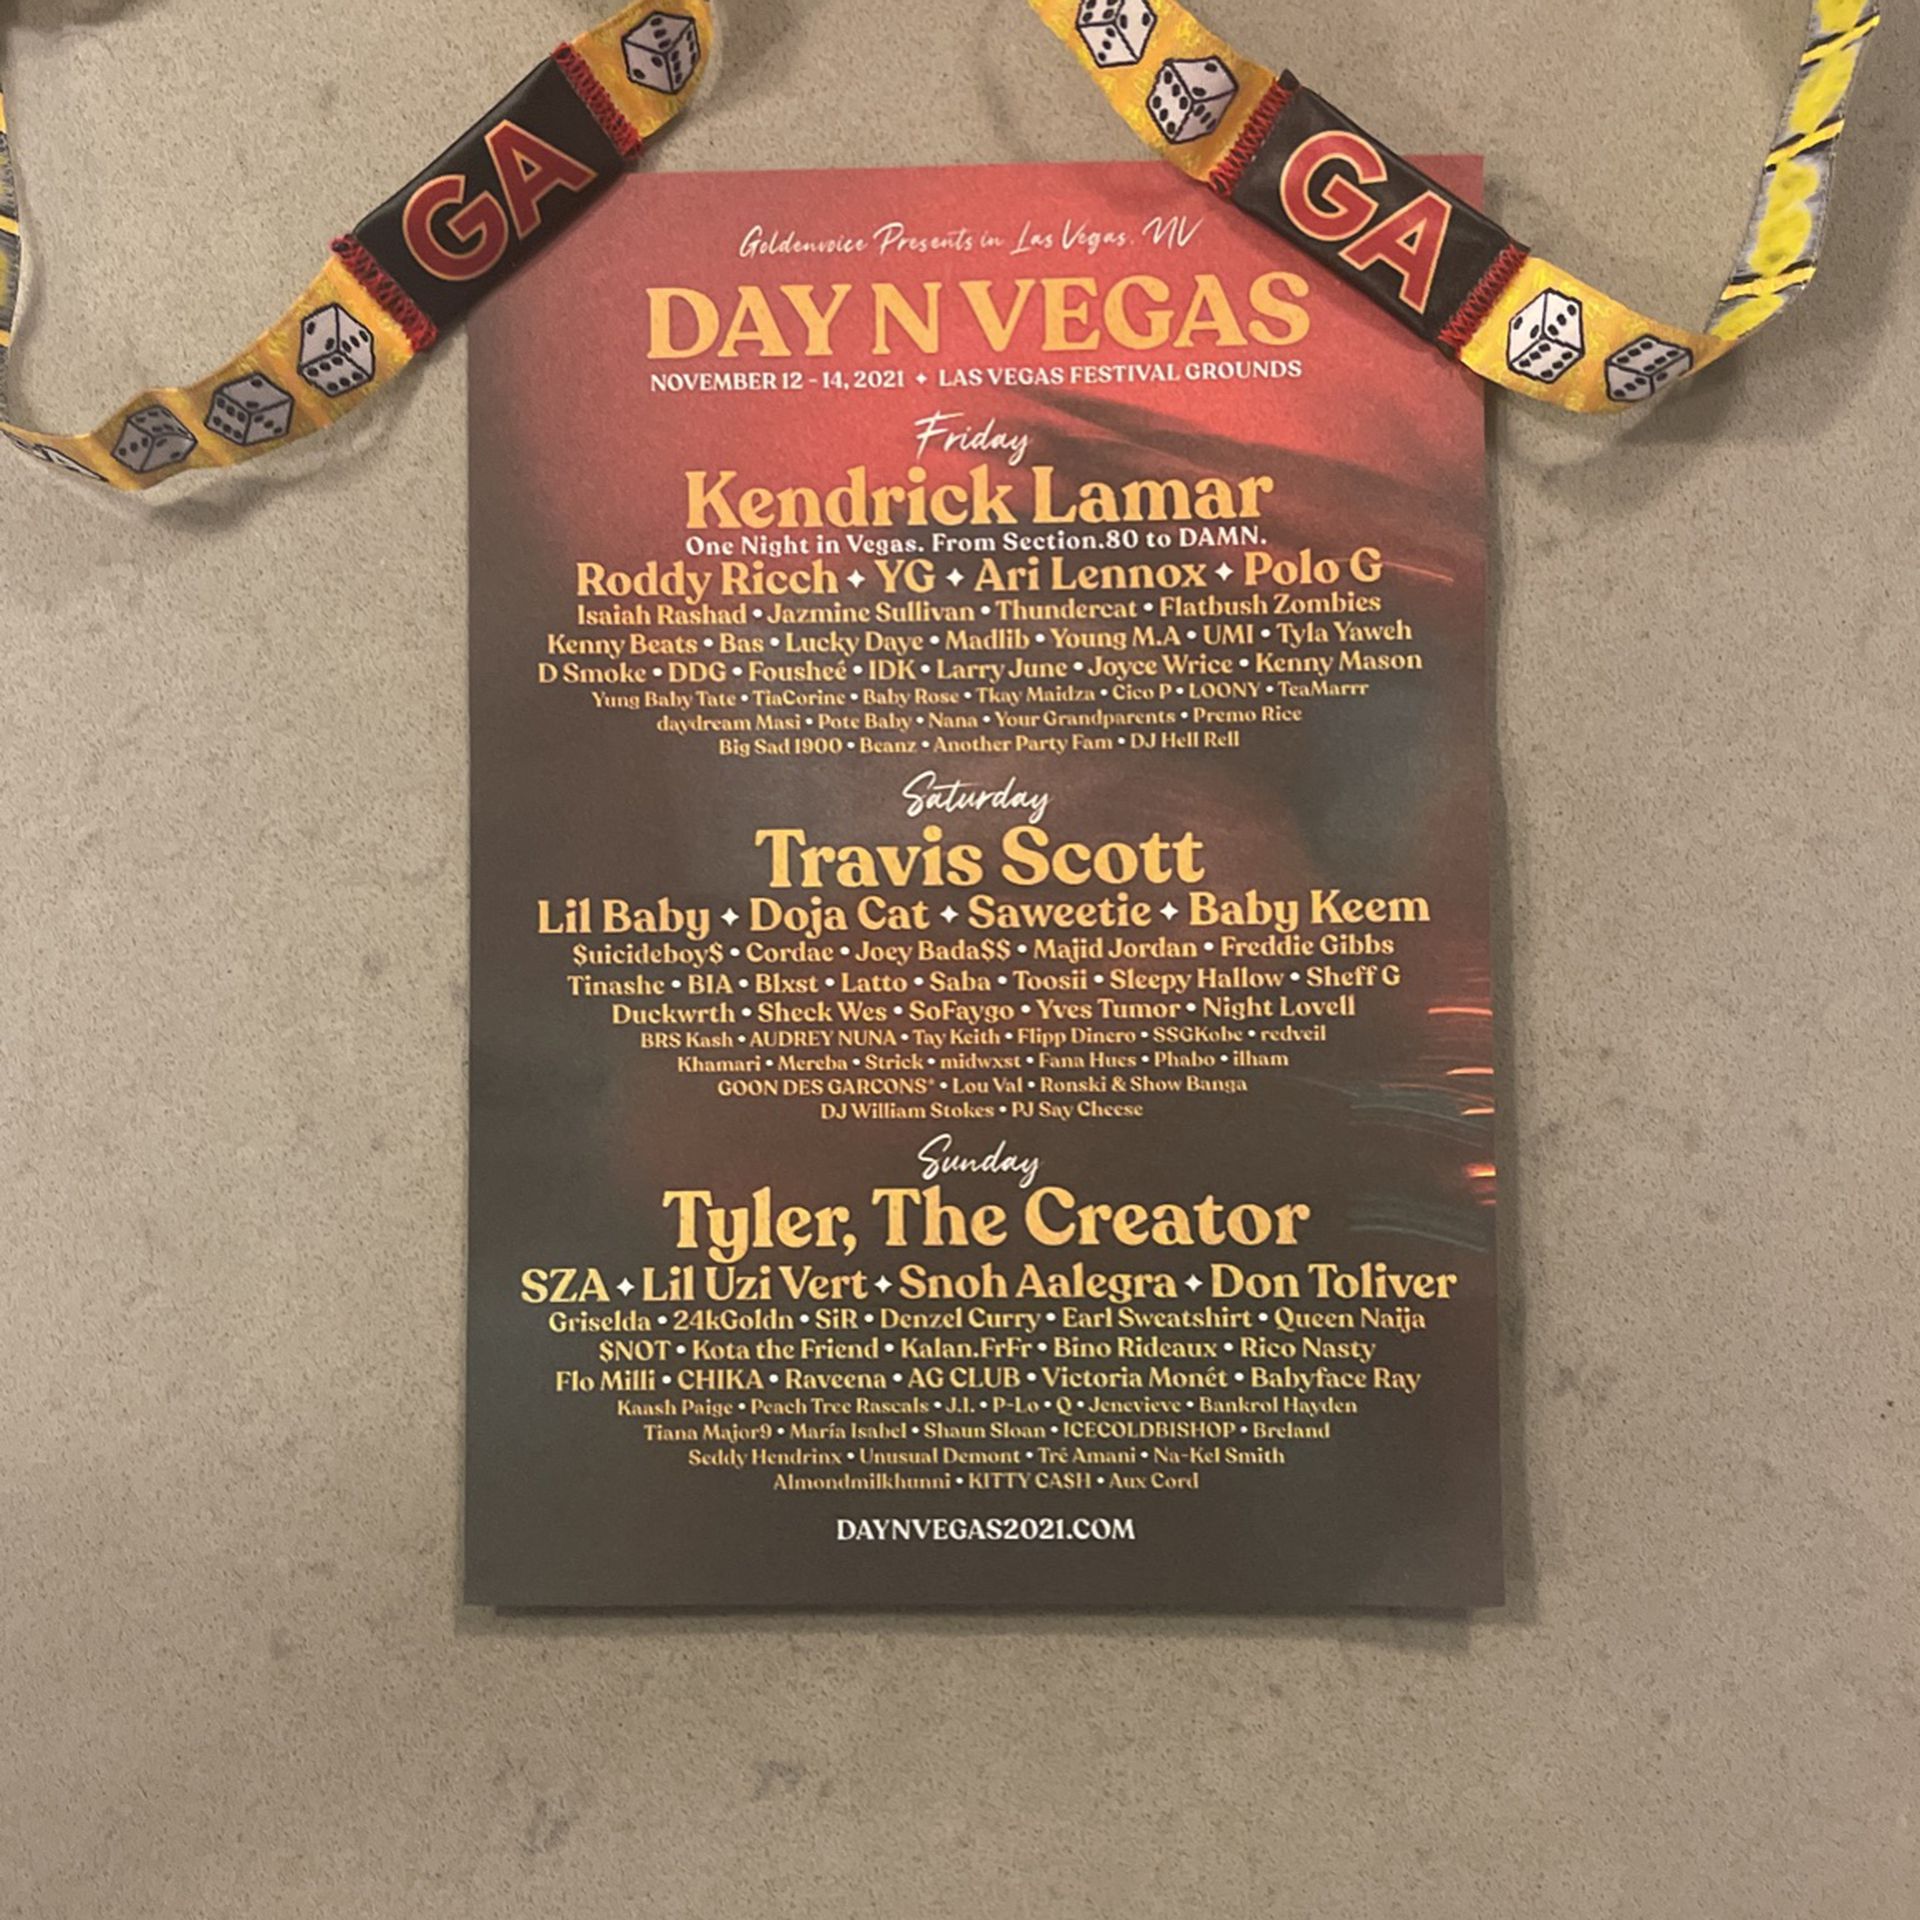 Day N Vegas 3-Day Passes (2 Tickets)